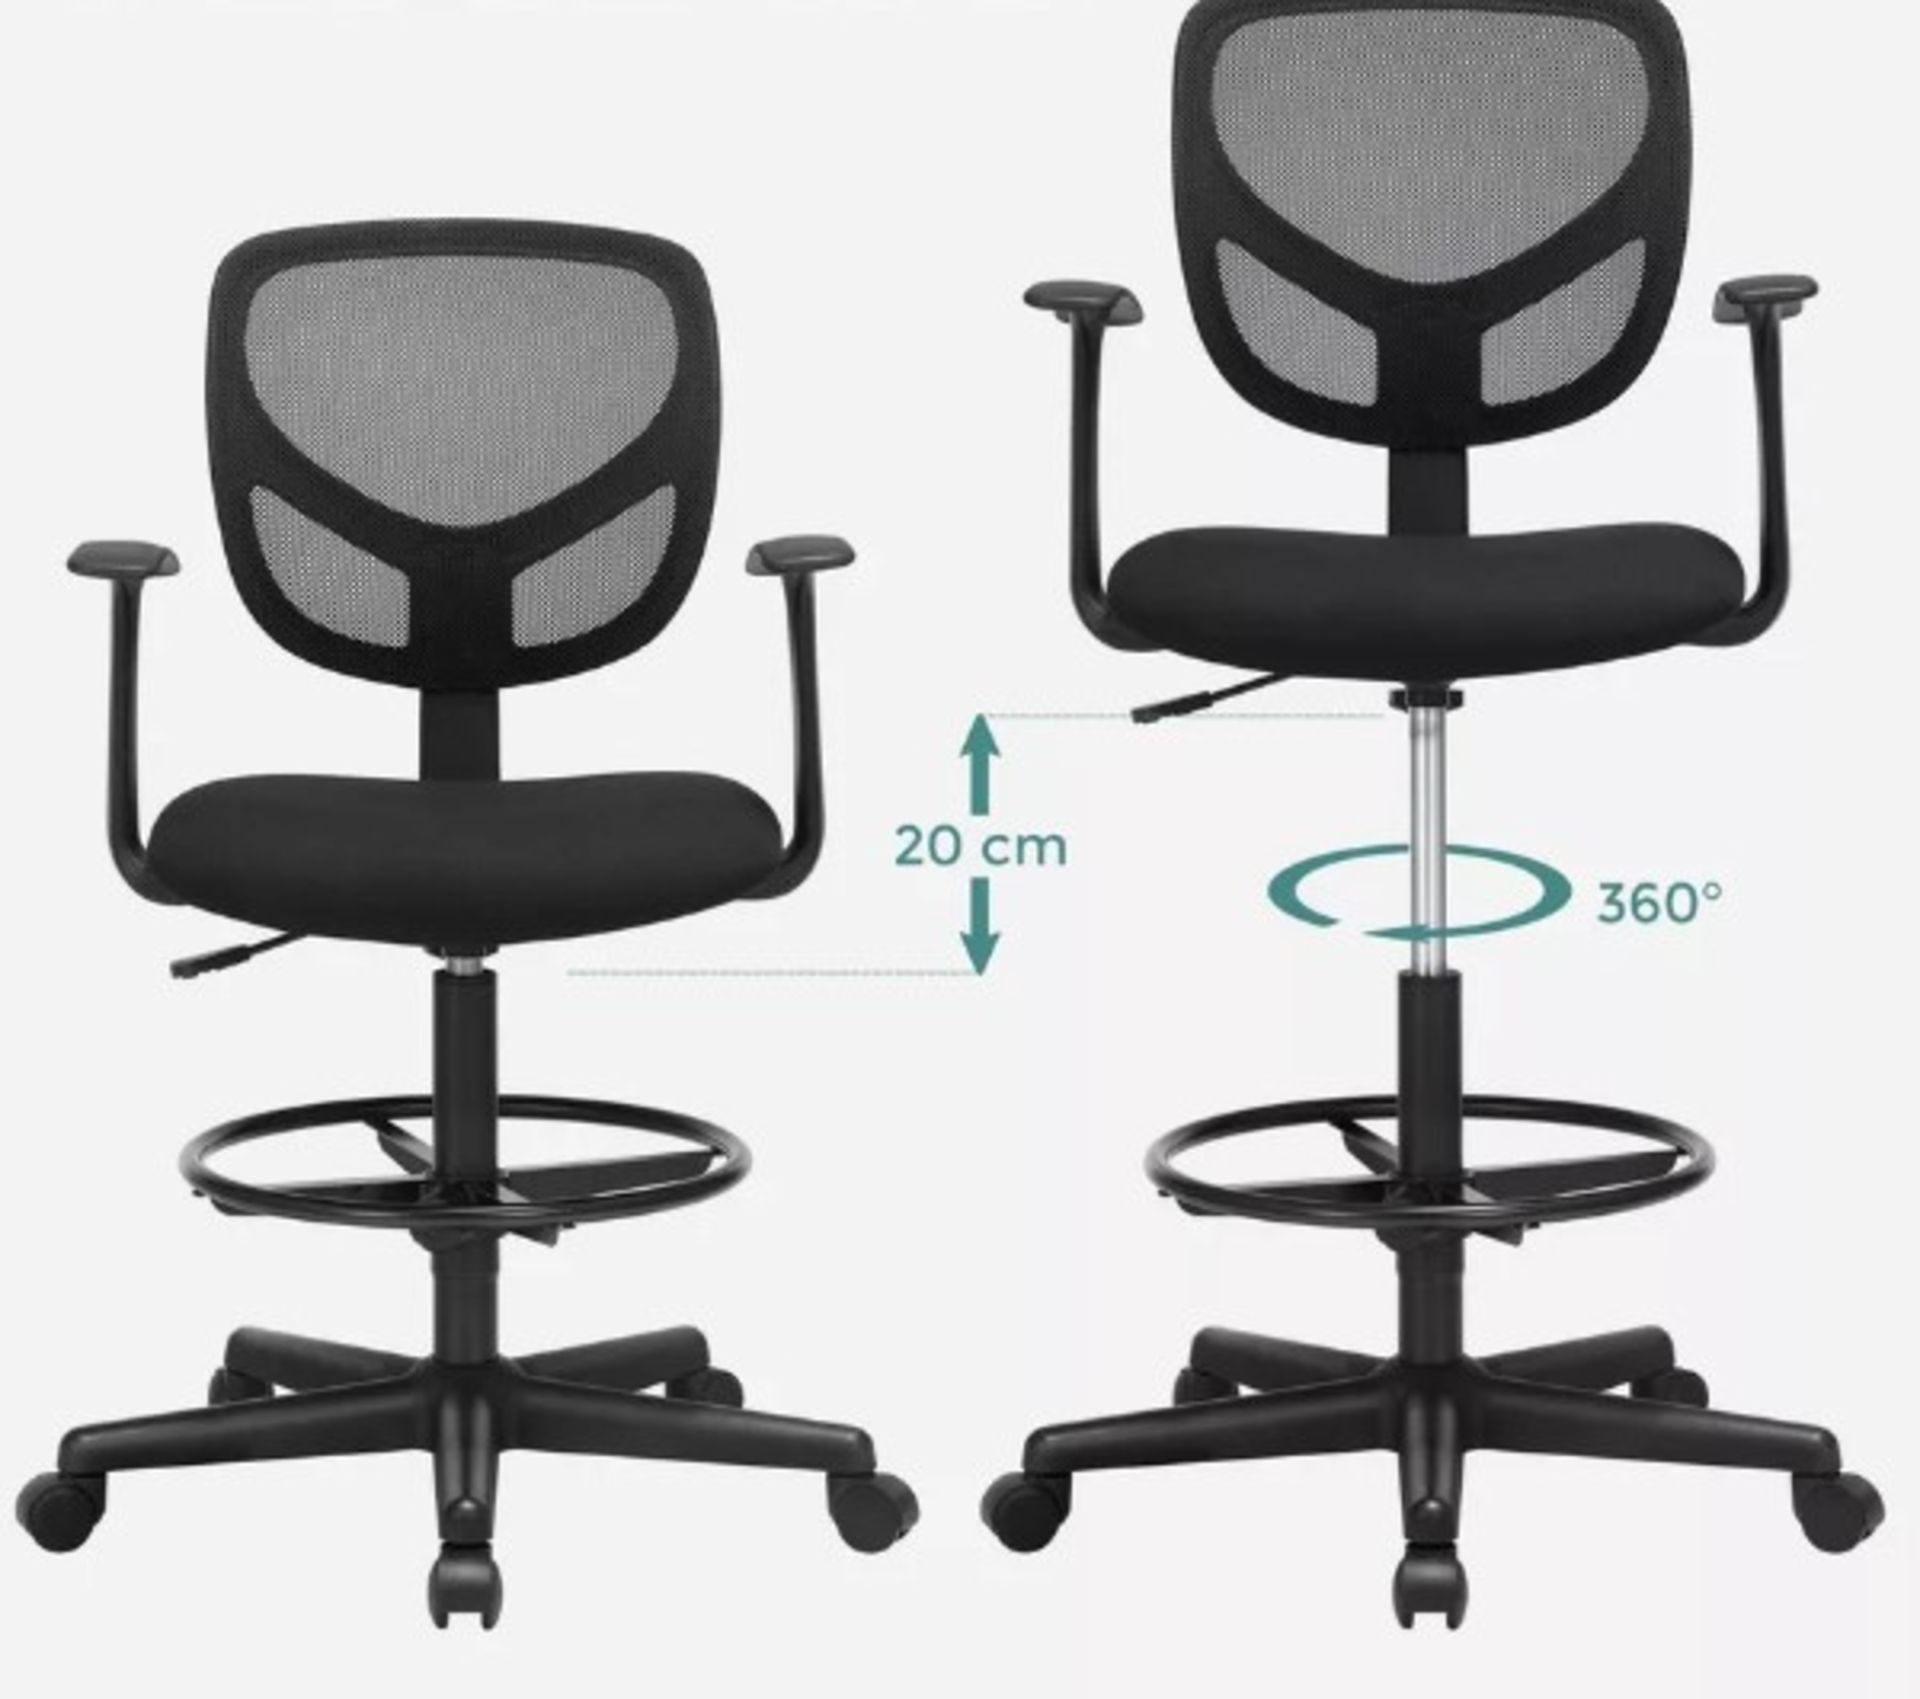 FREE DELIVERY - BRAND NEW SONGMICS DRAFTING STOOL CHAIR MESH OFFICE CHAIR HEIGHT ADJUSTABLE